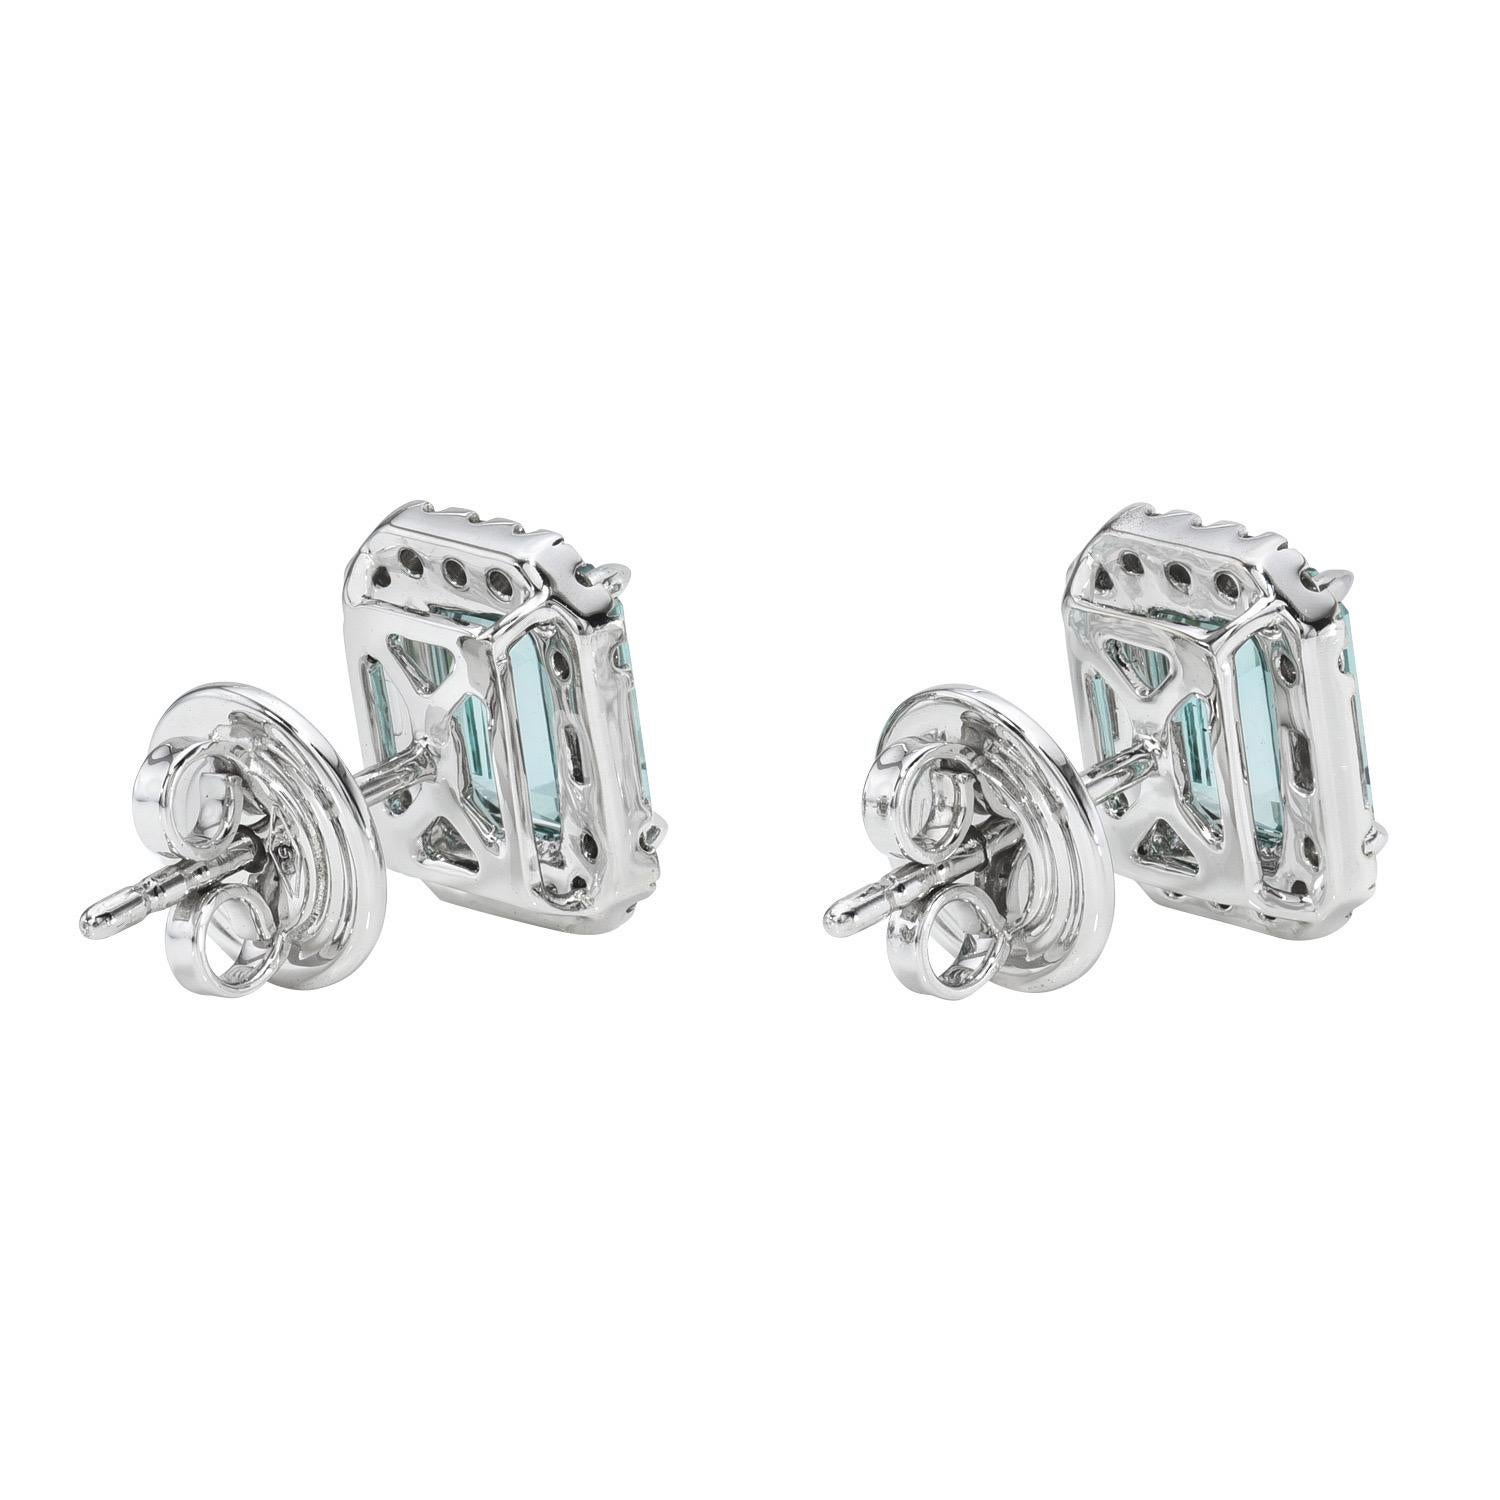 Mesmerizing pair of 2.95 carat Lagoon Blue Tourmaline Emerald Cut, 18K white gold earrings, decorated with a total of 0.32 carat collection round brilliant diamonds and 0.26 carat baguette diamonds.
Returns are accepted and paid by us within 7 days